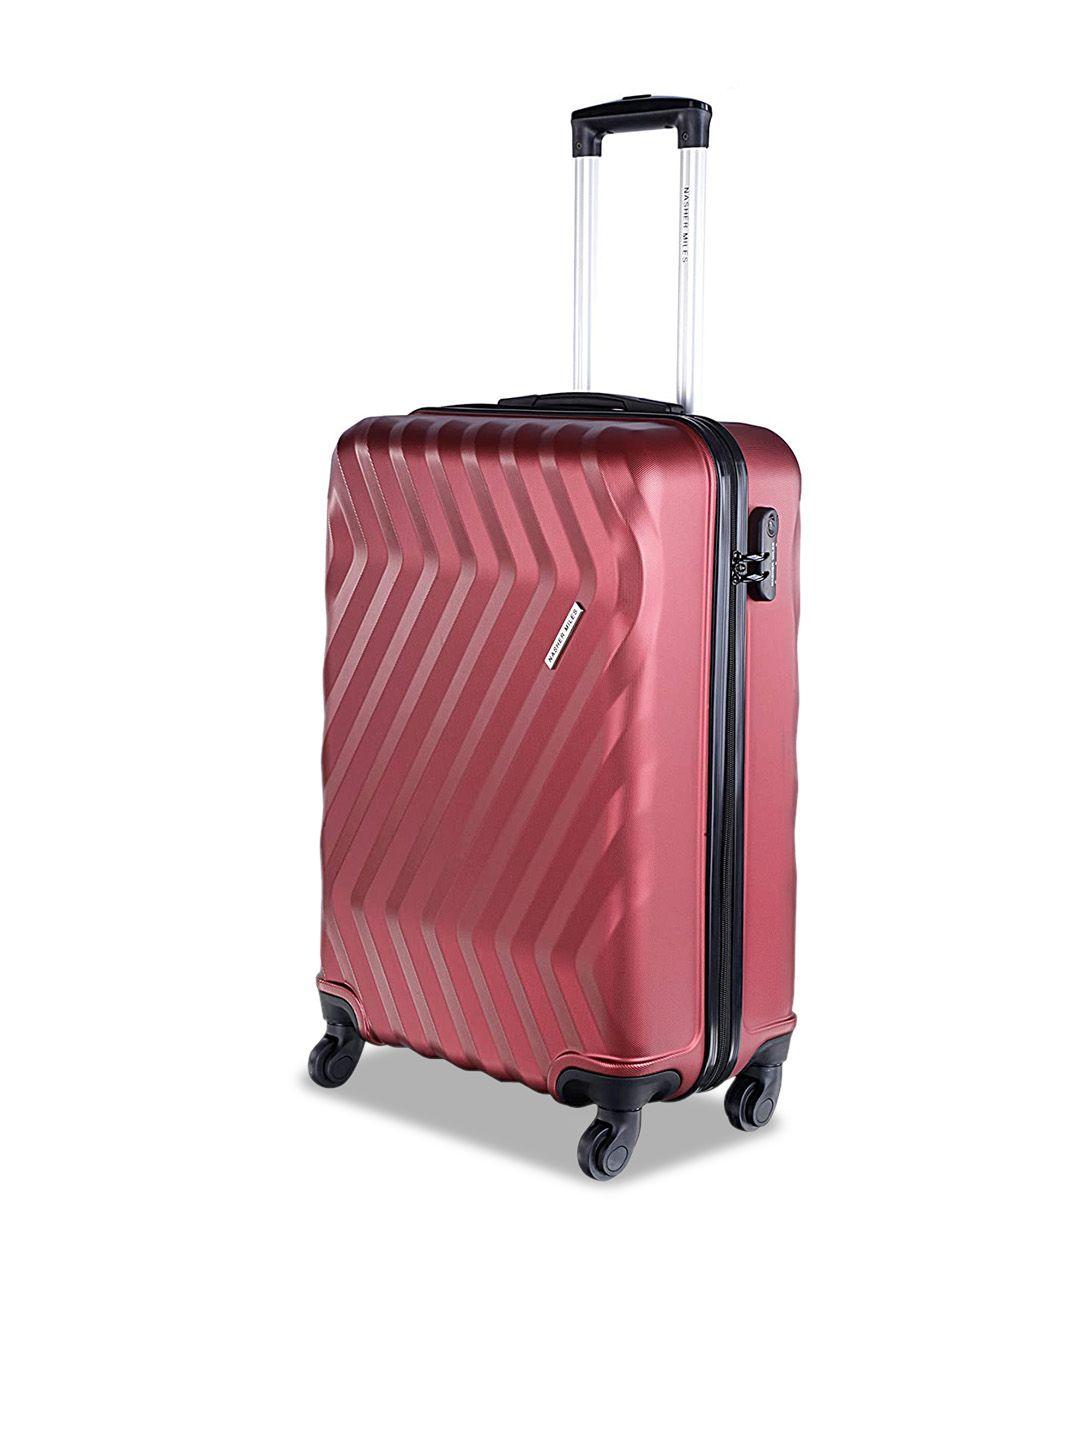 nasher miles lombard hard-sided cabin trolley suitcase